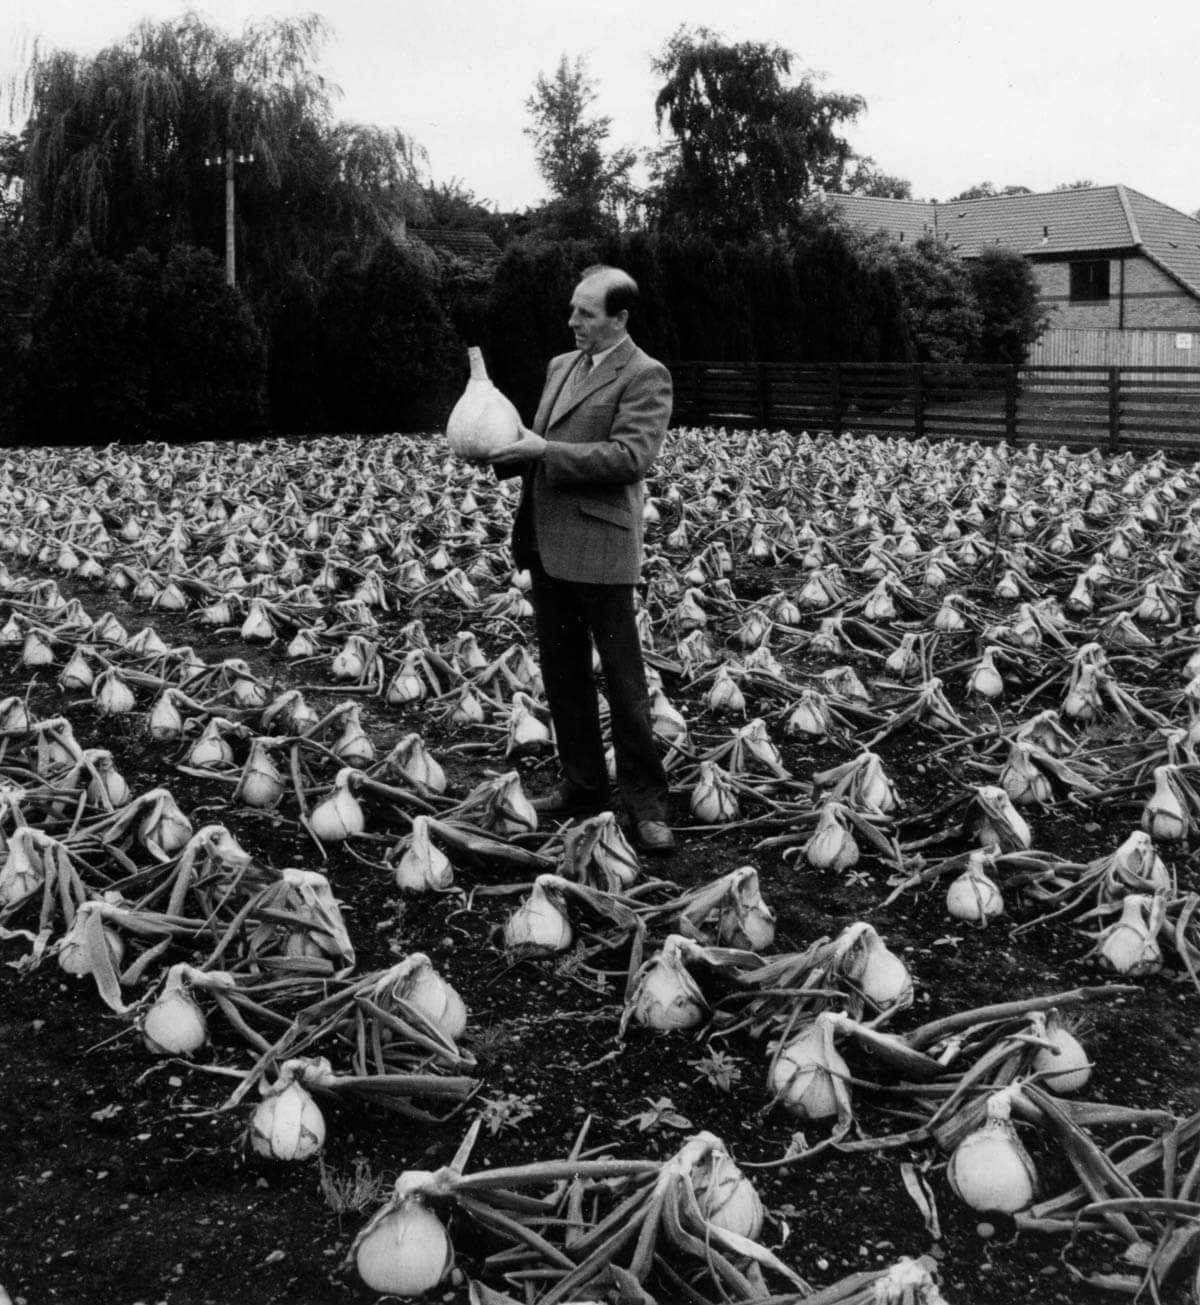 A photograph by Hector Innes circa nineteen ninety five captioned, “Robin Hogg holding the heaviest onion on world record, an onion of the Kelsae variety grown by Mr Ednie of Fife. From ca. 1965 to 1996 Hogg was responsible for the seed production and development of the Kelsae seed variety in Kelso, Scotland.” 